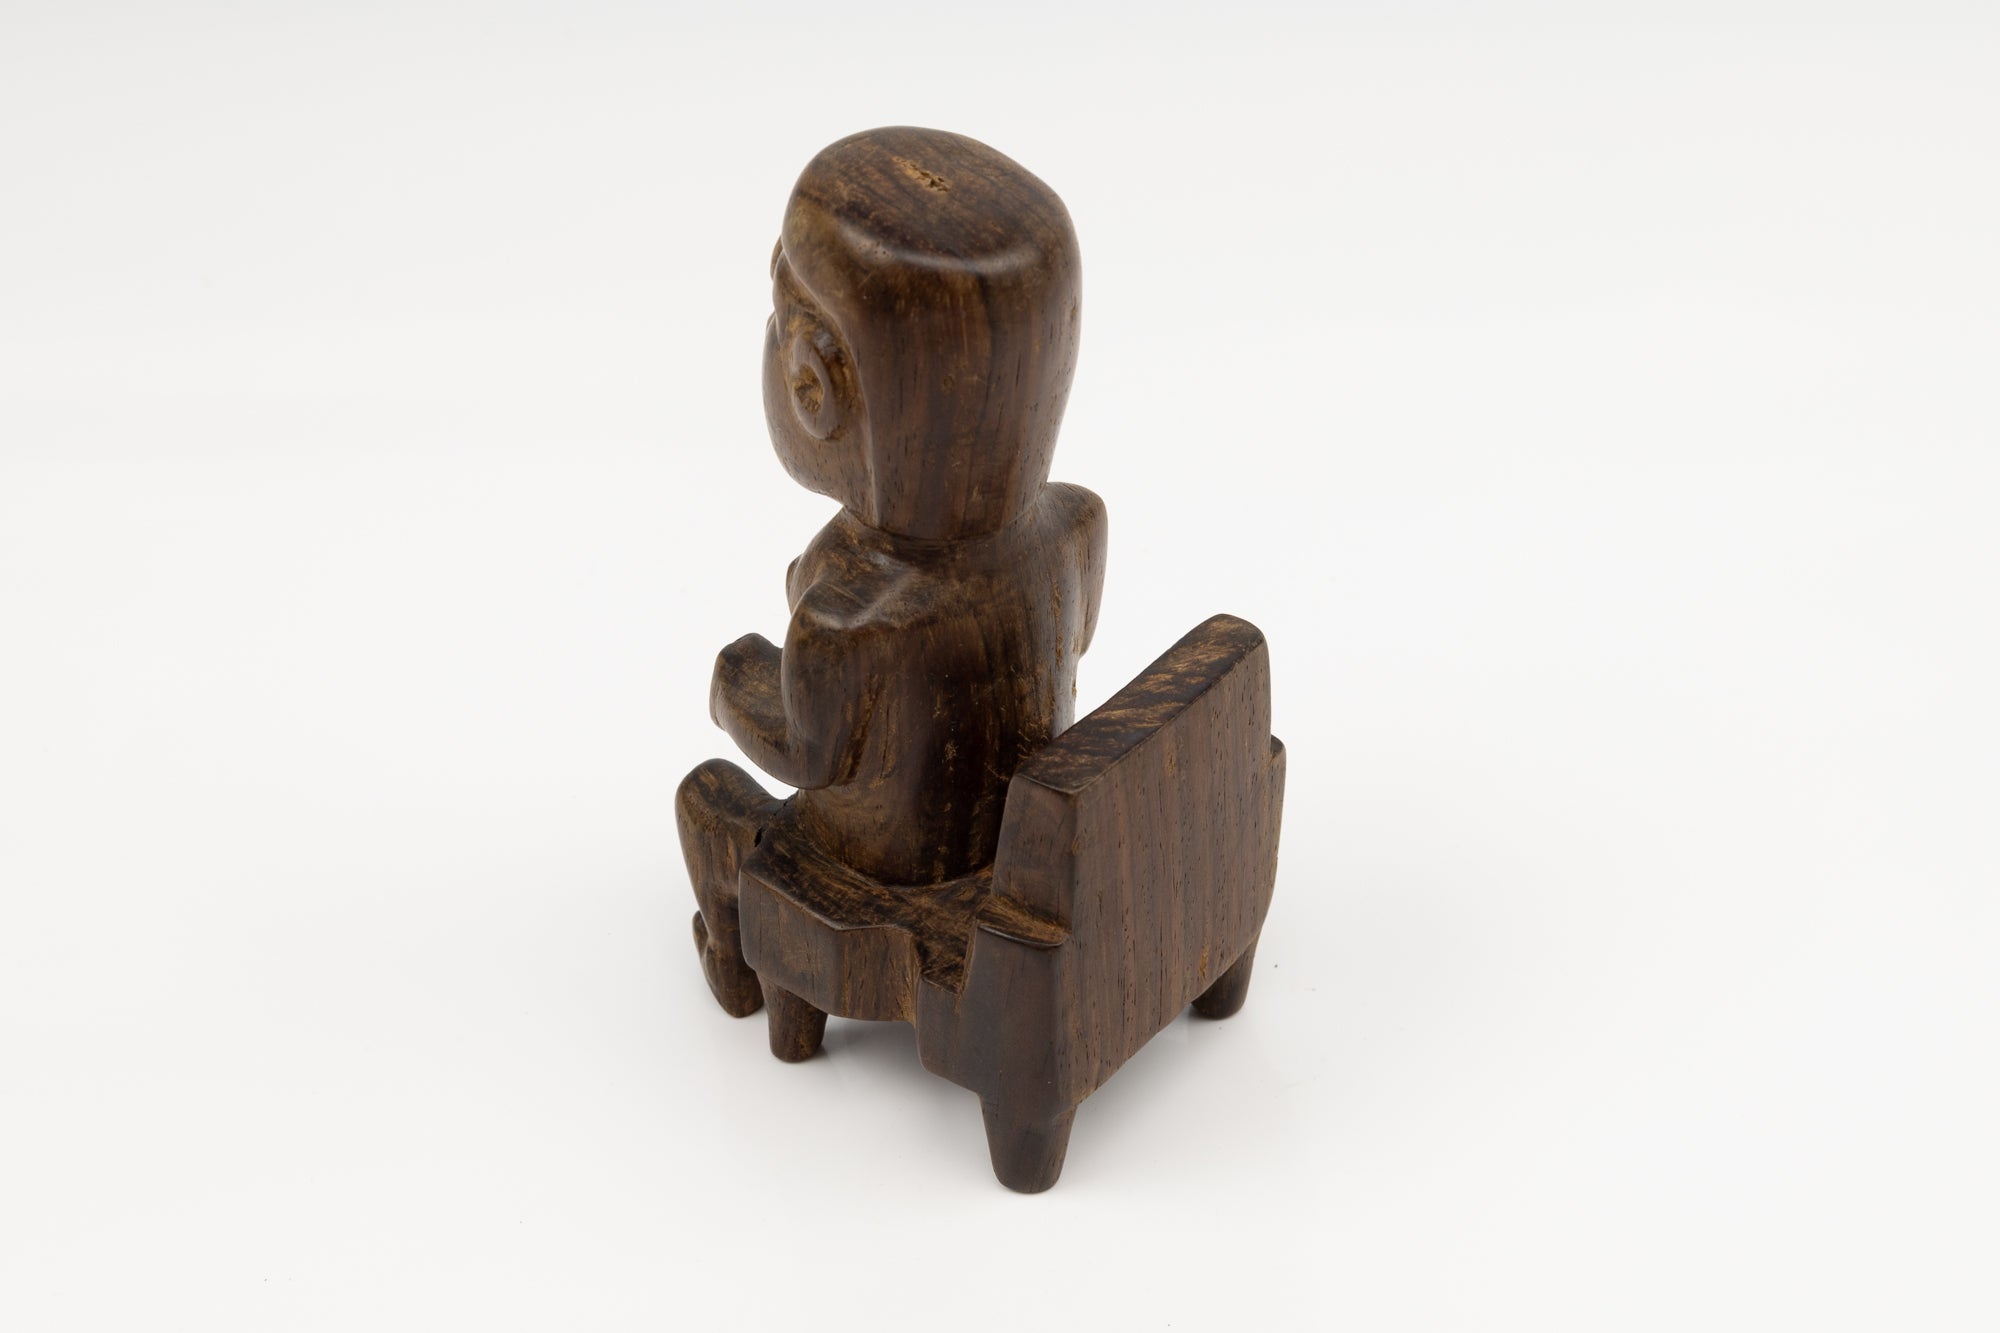 Hand Carved Cocobolo Wood Figure in Chair Sculpture